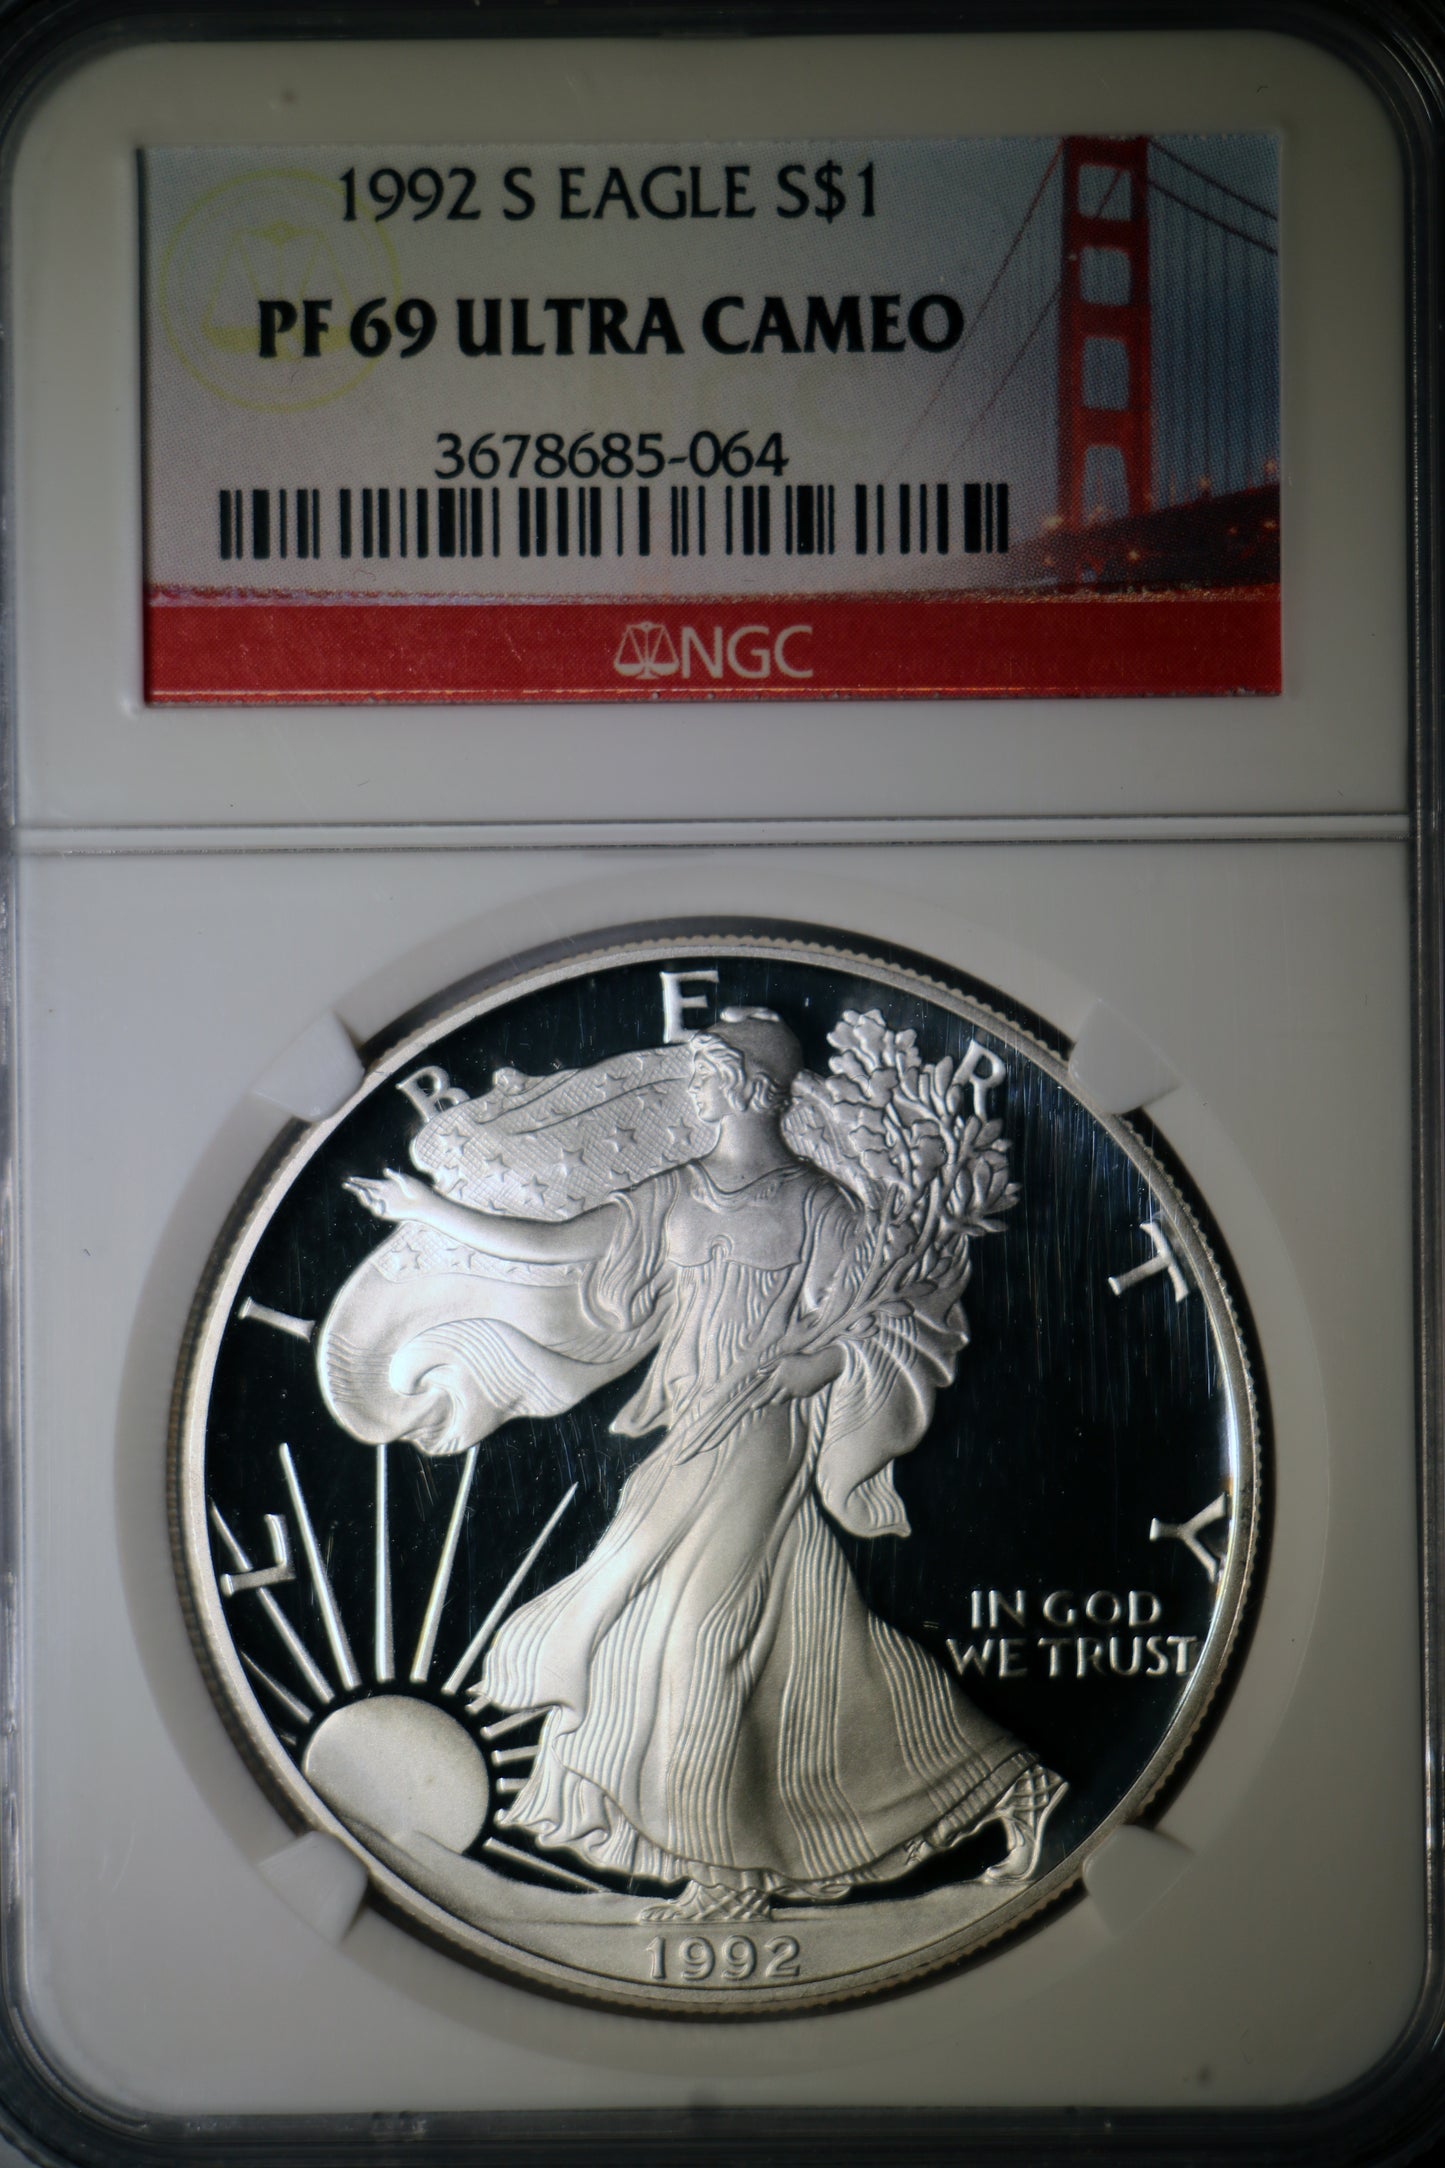 1992-S PF69 Ultra Cameo American Silver Eagle $1 NGC Golden Gate Label